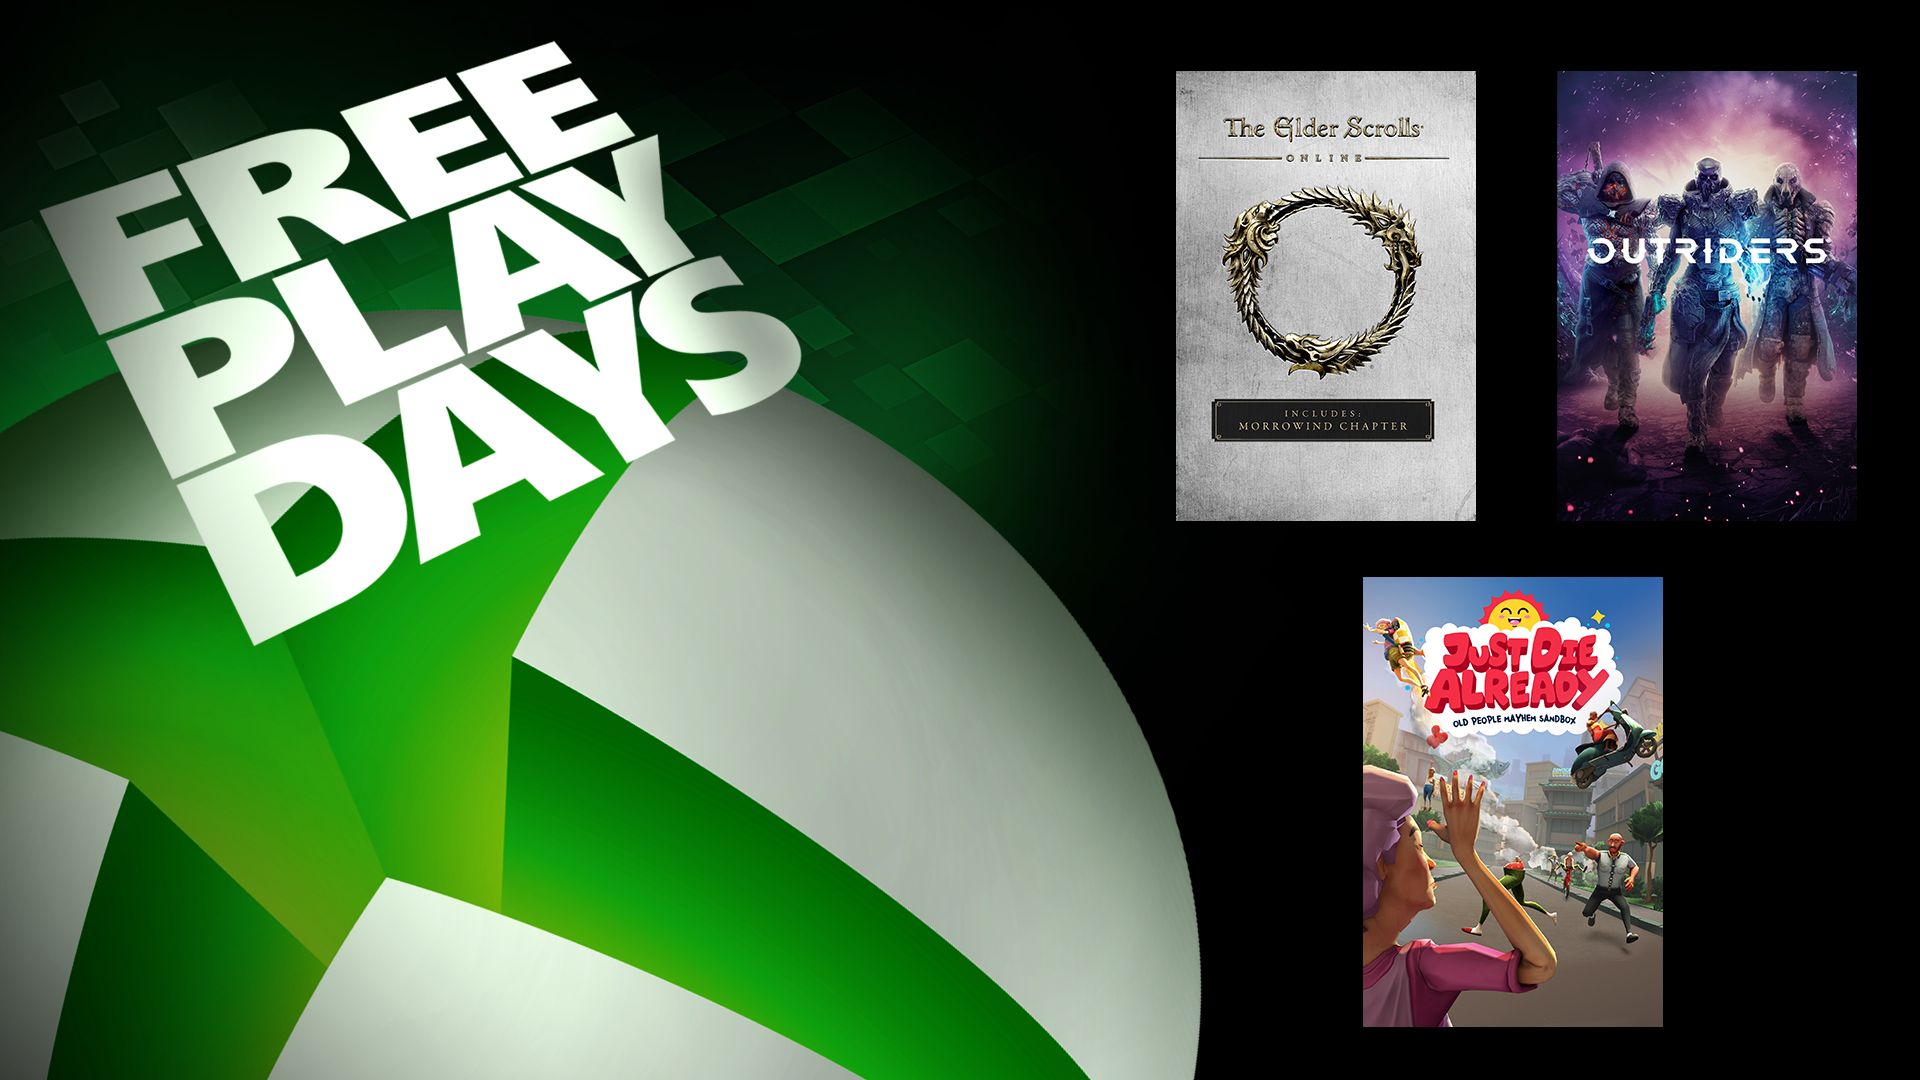 Free Play Days – Just Die Already, Outriders, and The Elder Scrolls Online